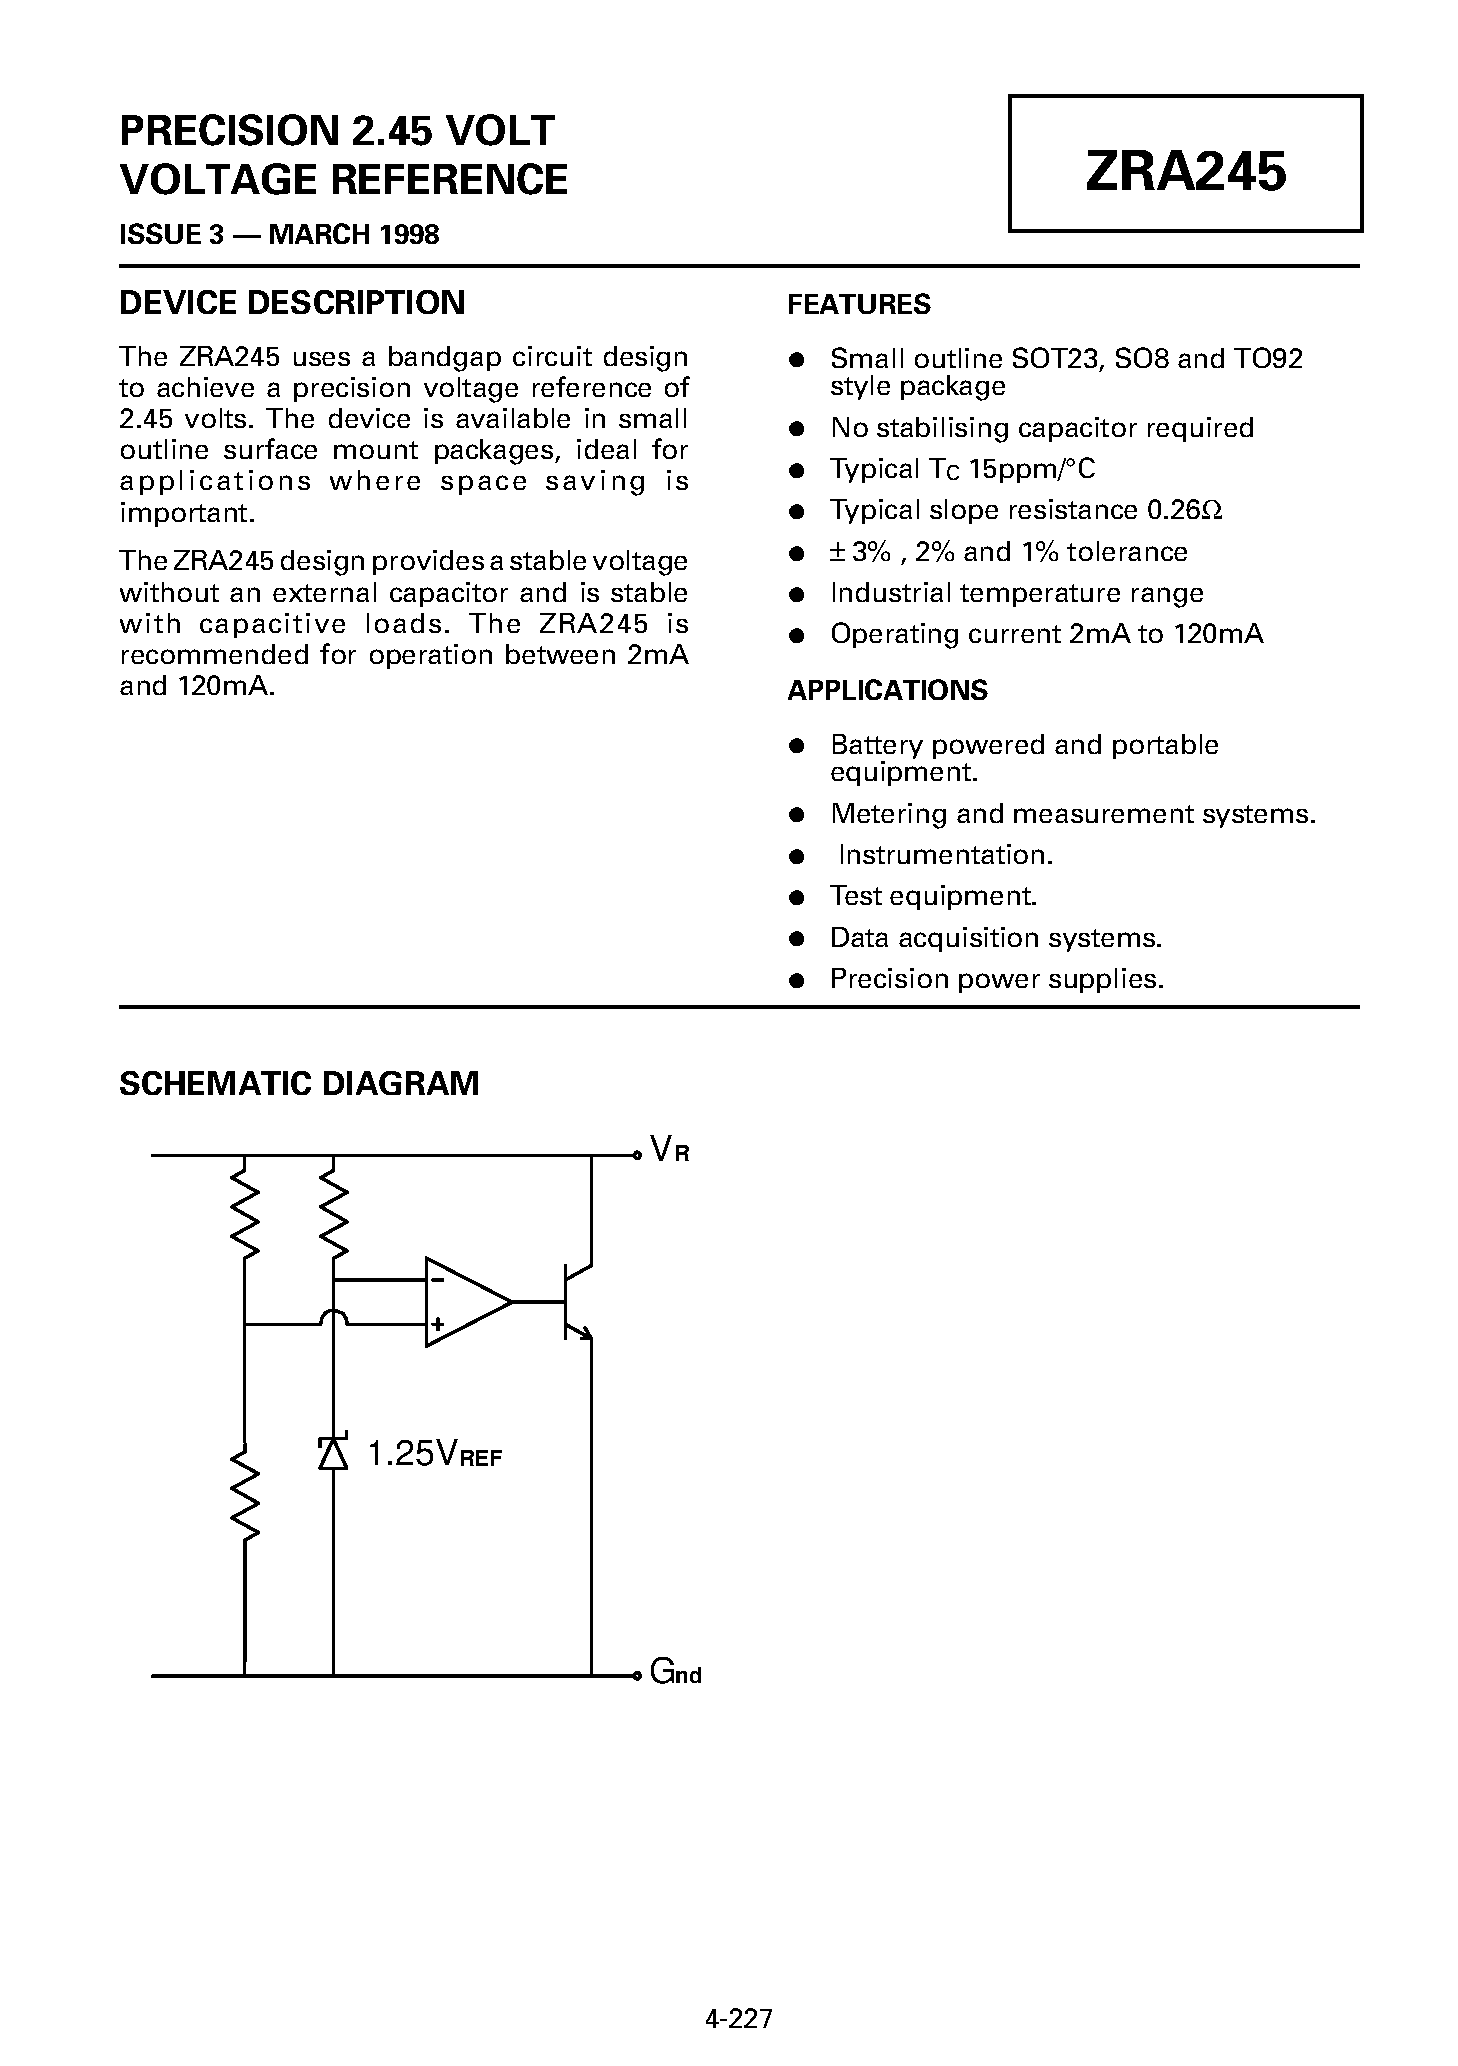 Datasheet ZRA245N803 - PRECISION 2.45 VOLT VOLTAGE REFERENCE page 1